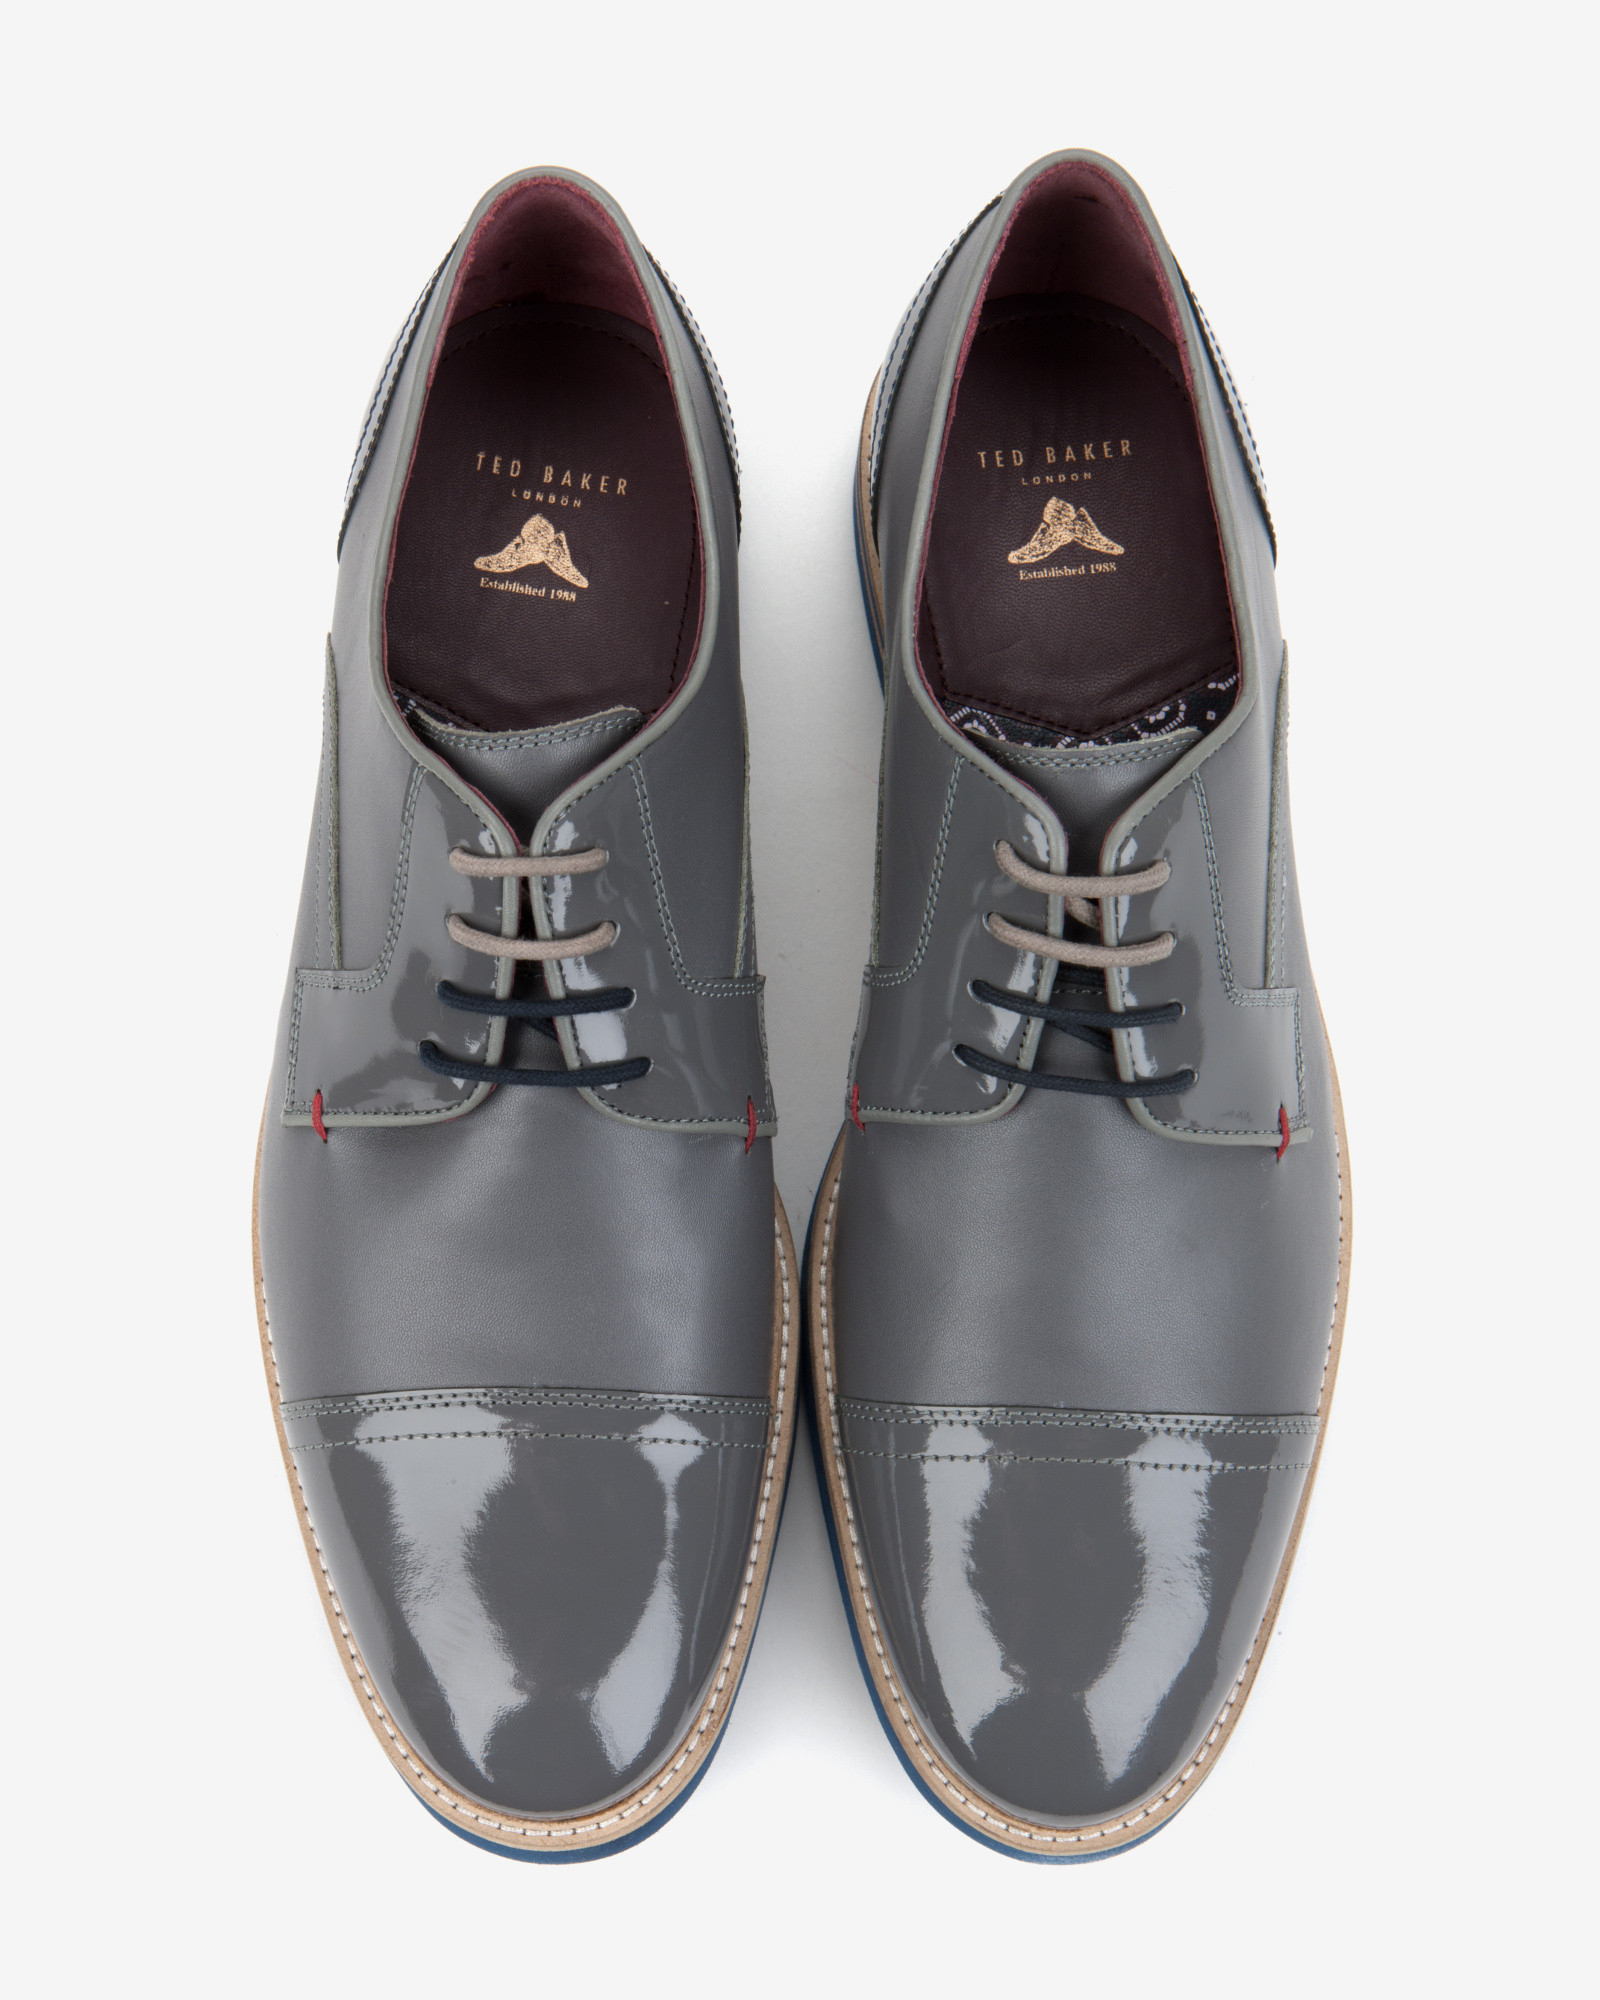 Ted Baker Textured Leather Derby Shoes in Gray for Men - Lyst